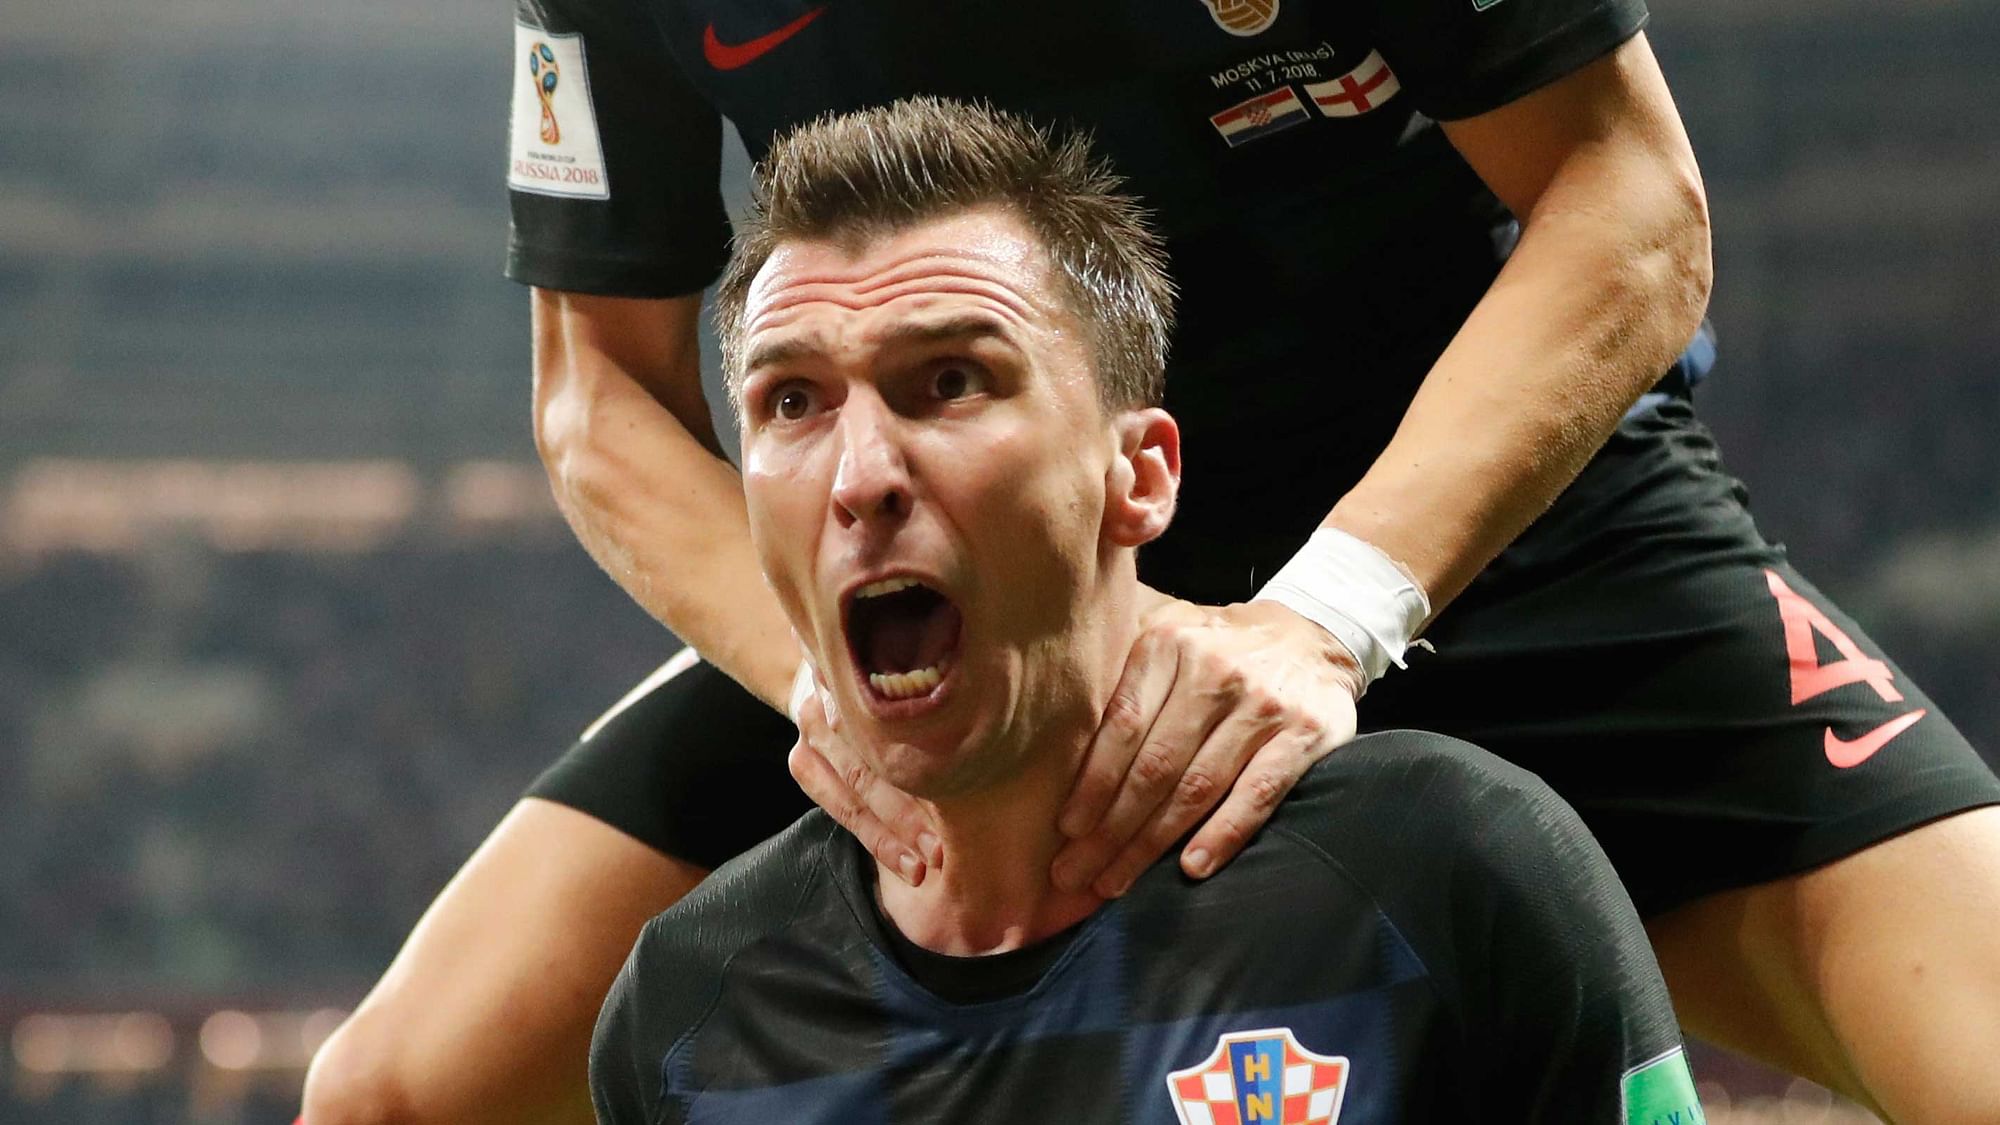 Croatia’s Mario Mandzukic celebrates after scoring his side’s second goal during the semifinal match between Croatia and England at the 2018 soccer World Cup in the Luzhniki Stadium in Moscow, Russia, Wednesday, July 11, 2018.&nbsp;